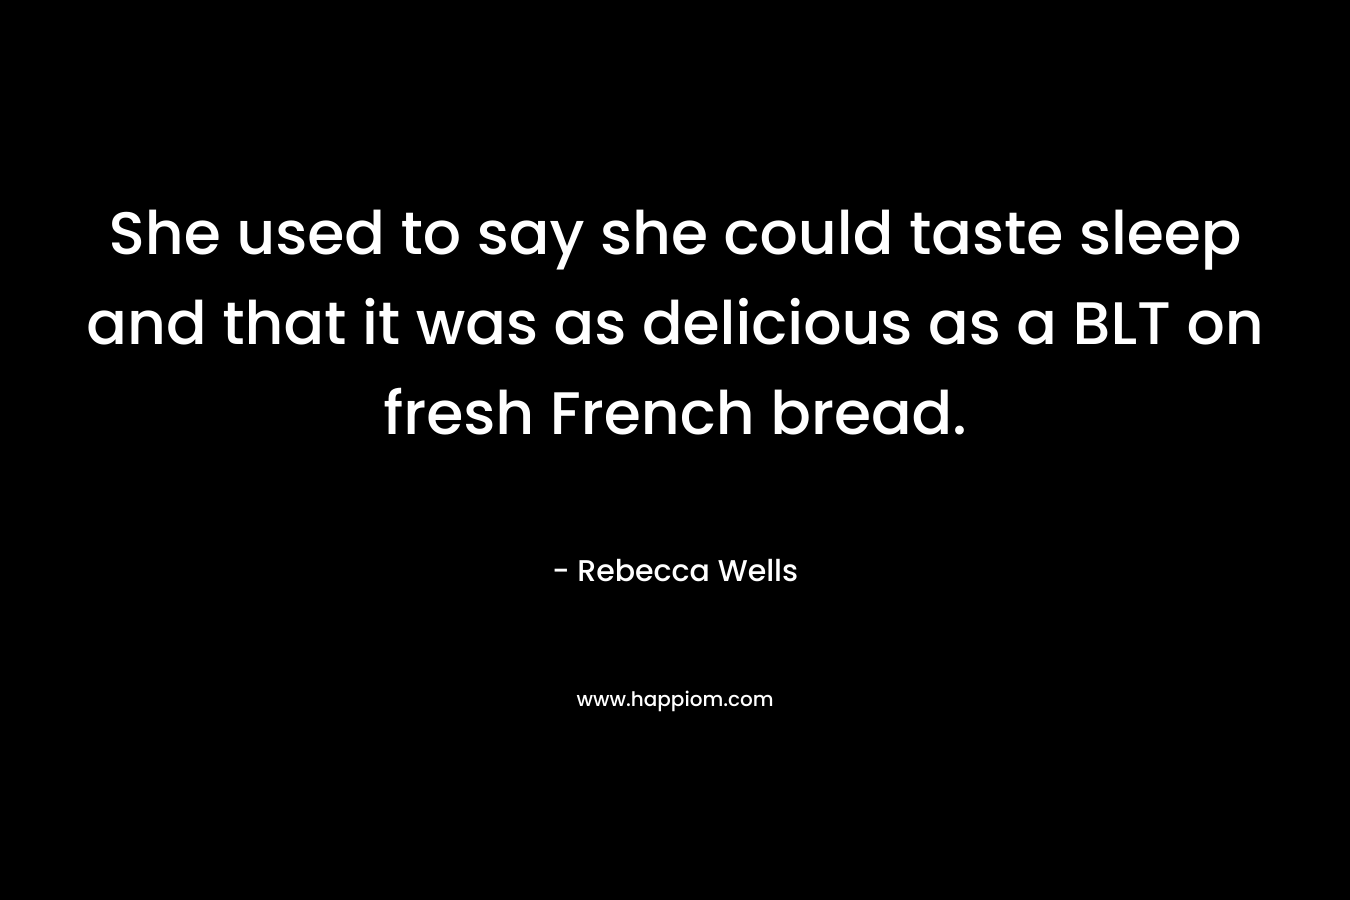 She used to say she could taste sleep and that it was as delicious as a BLT on fresh French bread. – Rebecca Wells